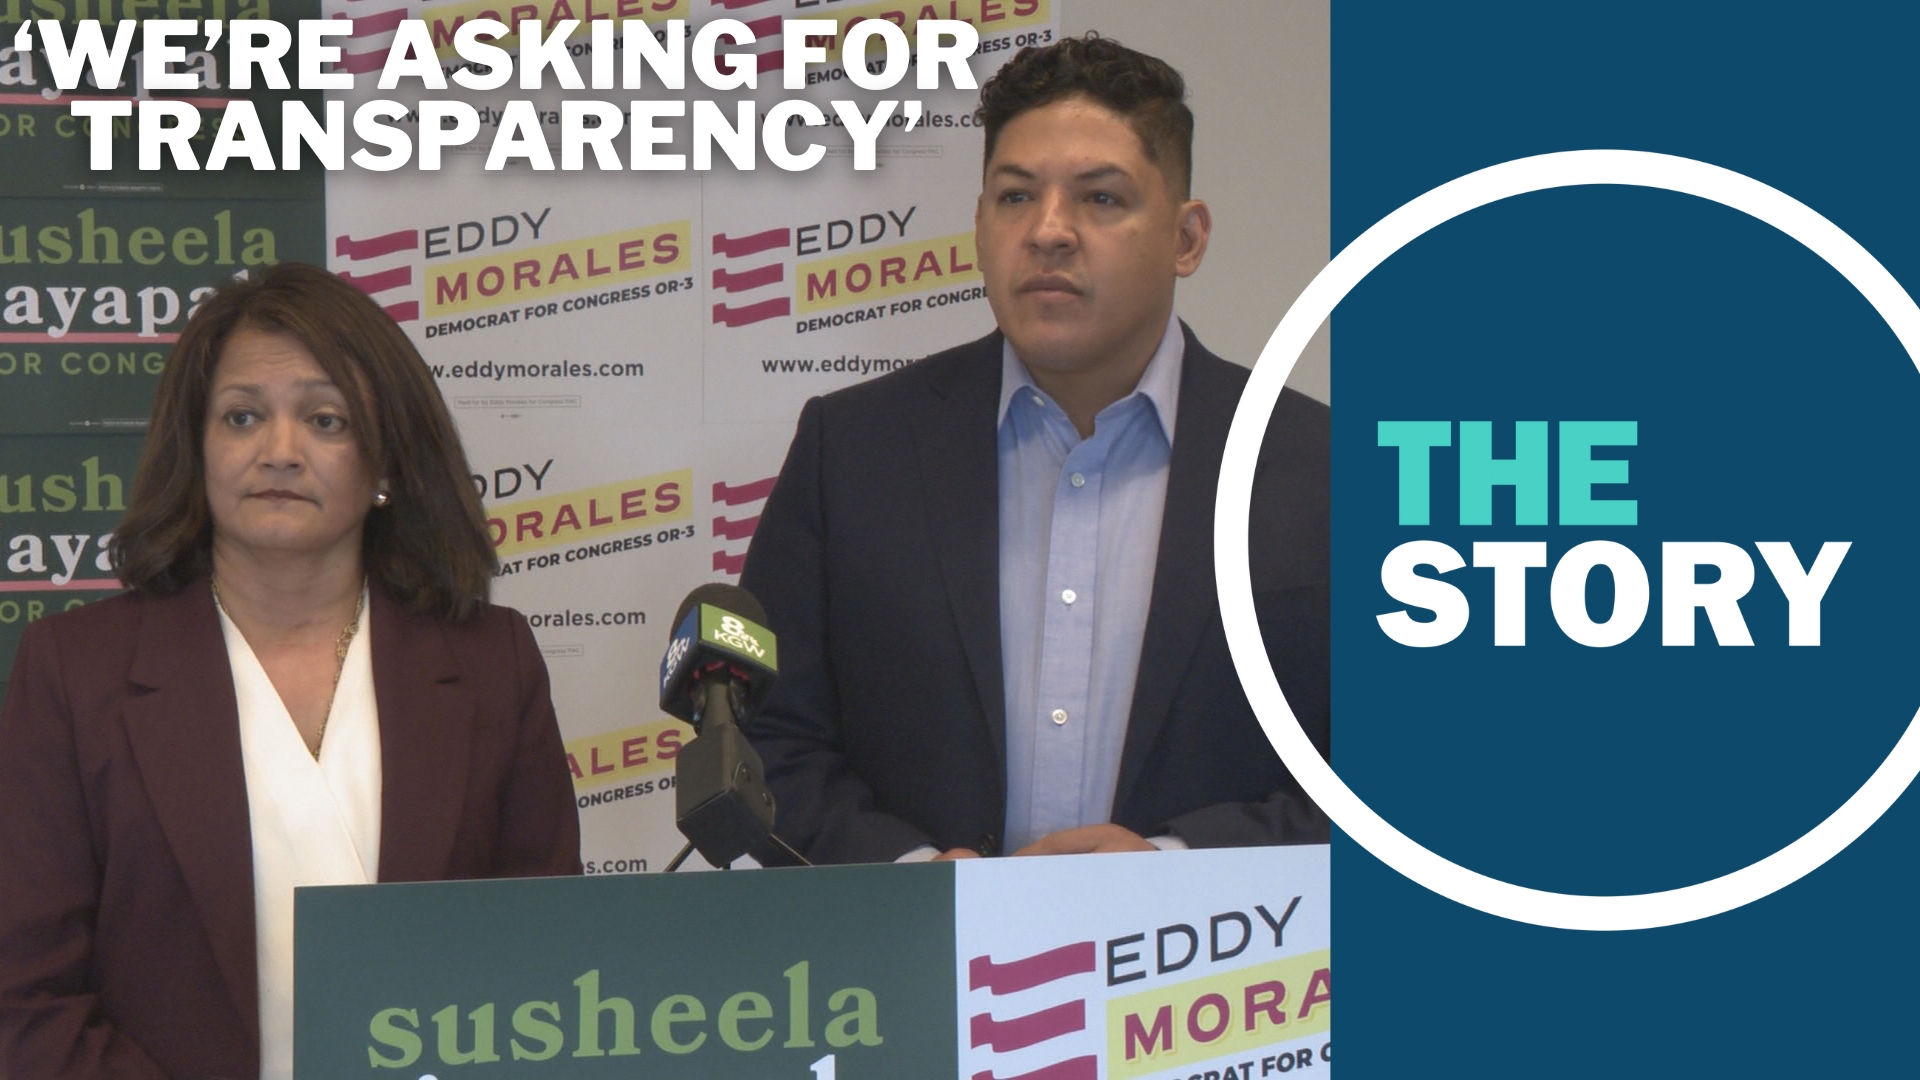 Susheela Jayapal and Eddy Morales are pushing Maxine Dexter to find out who's behind $1.6 million spent on the race through a group called 314 Action.